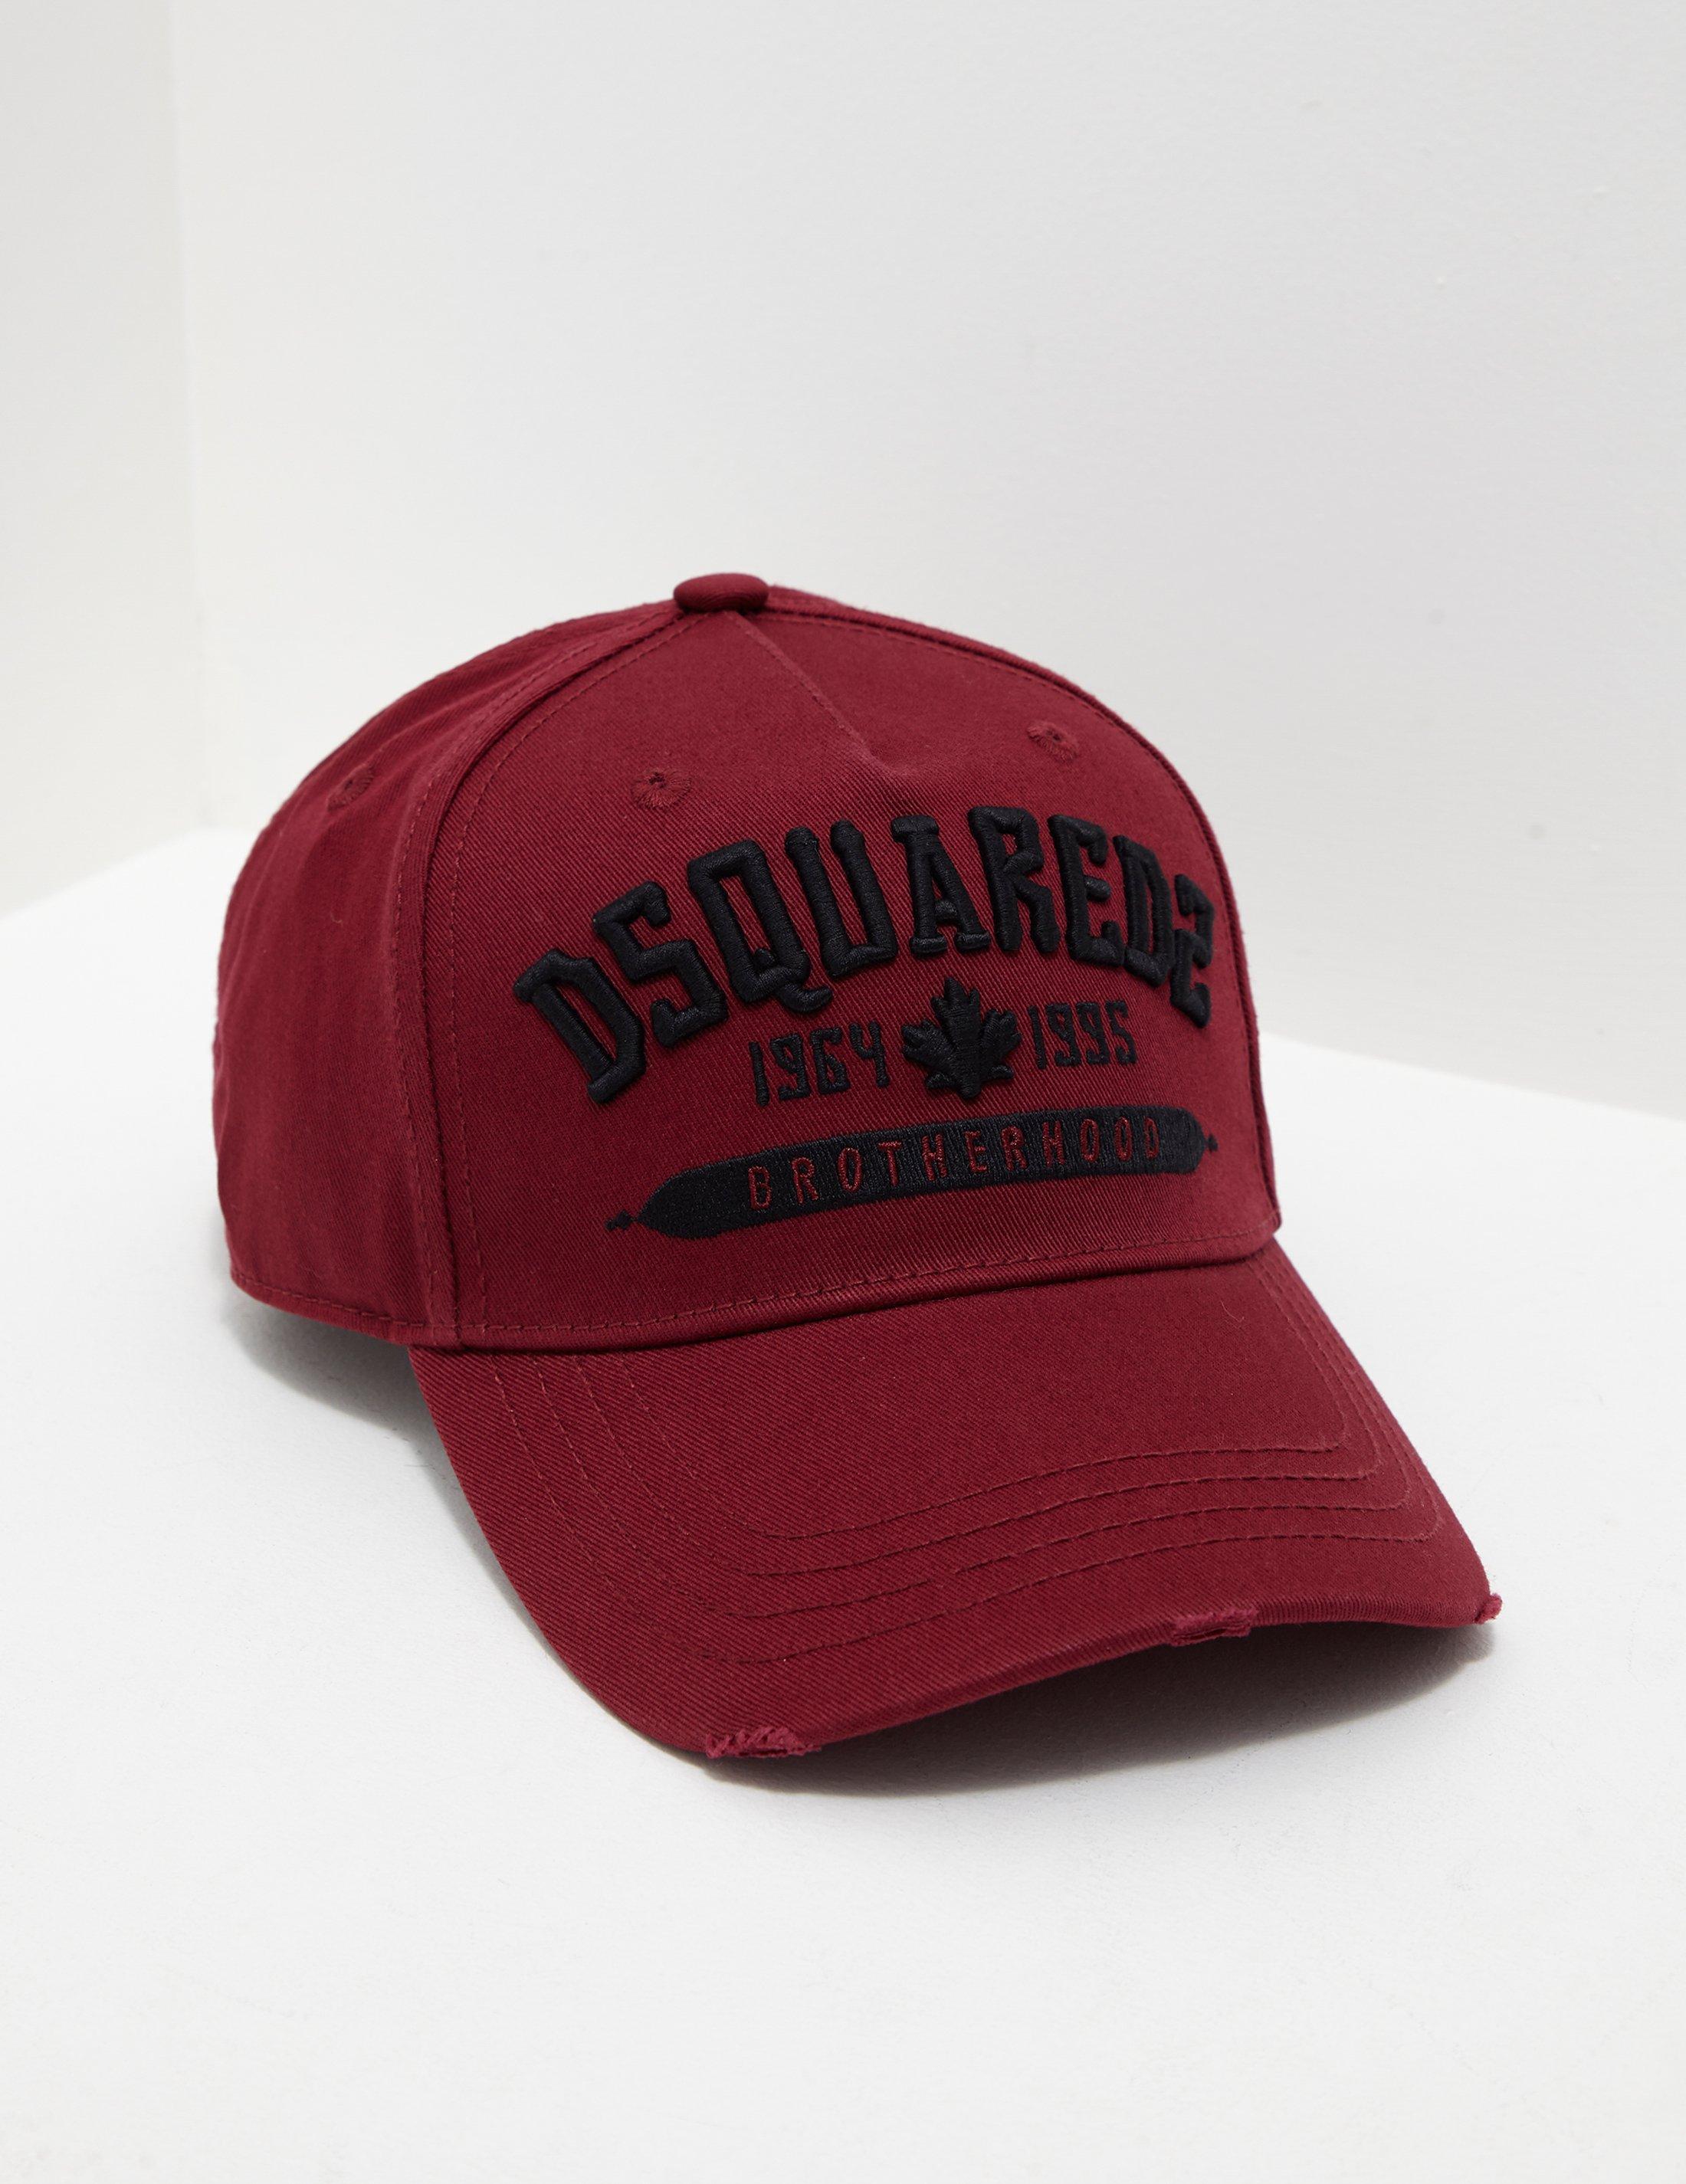 red and black dsquared hat